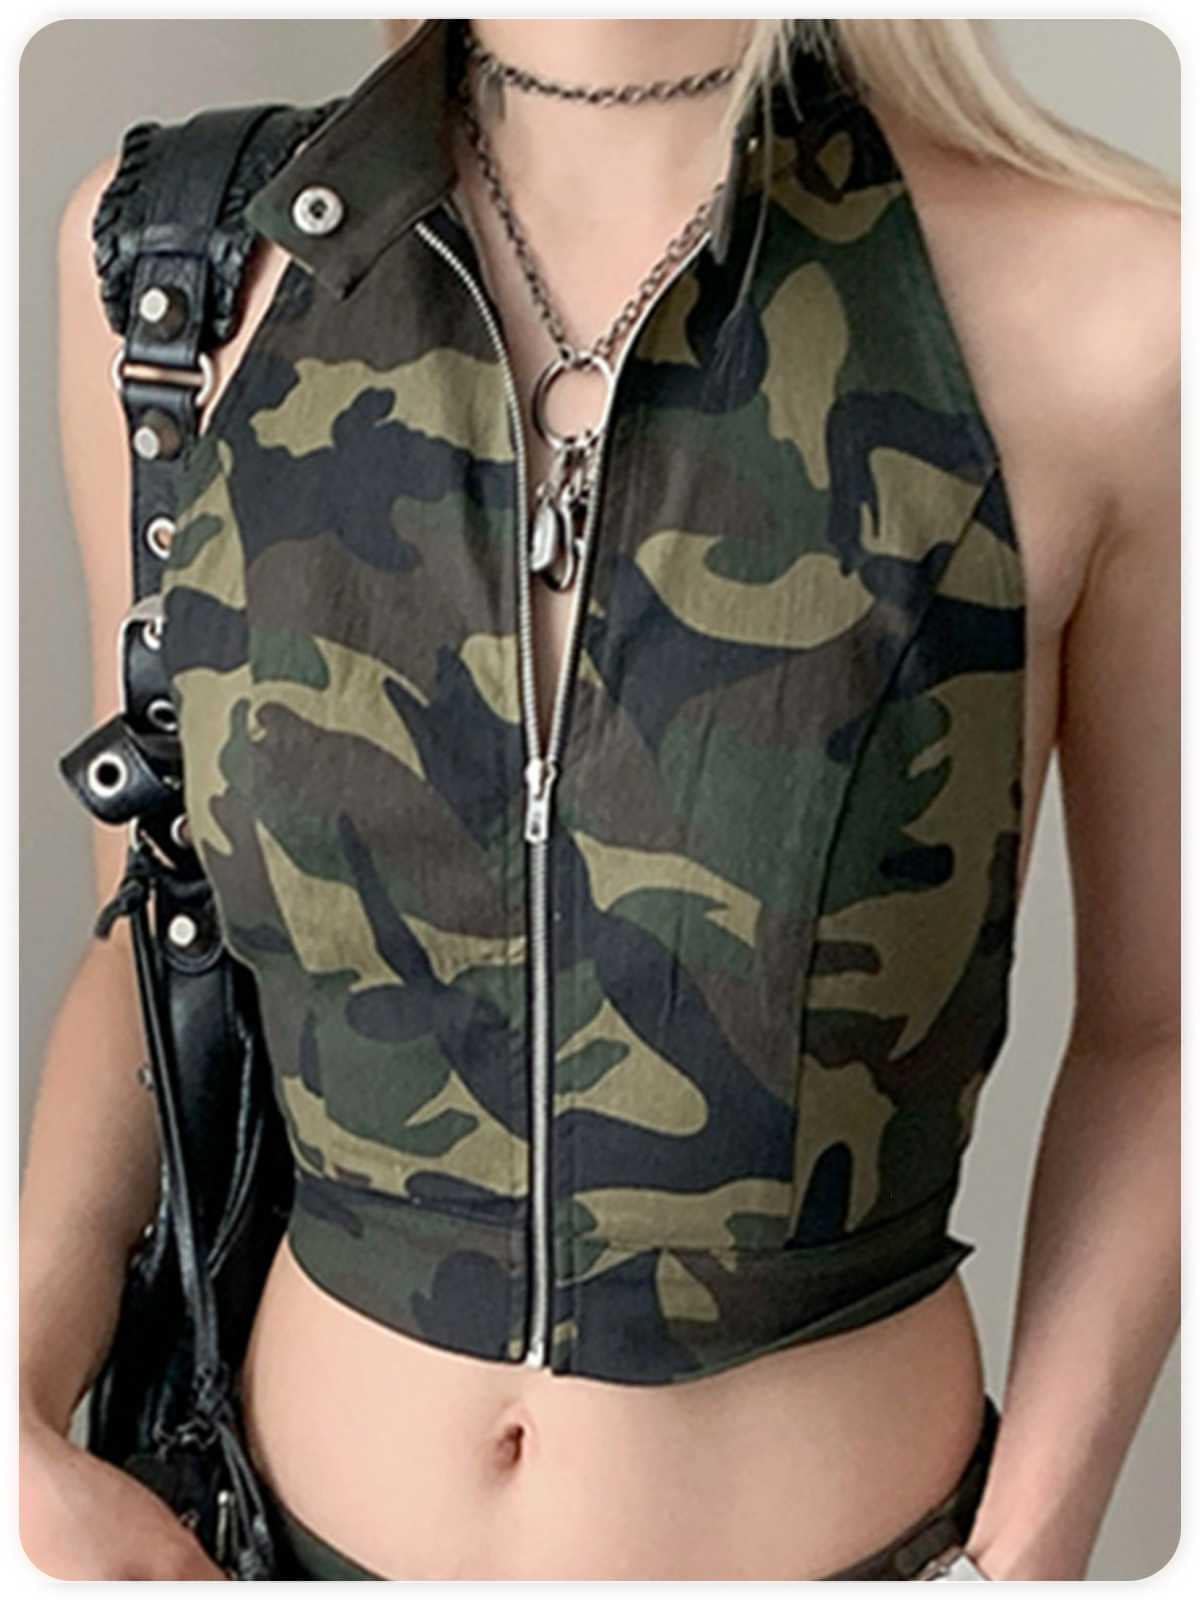 Moggemol Kids Girls Camouflage Racer Back Crop Tops with Athletic